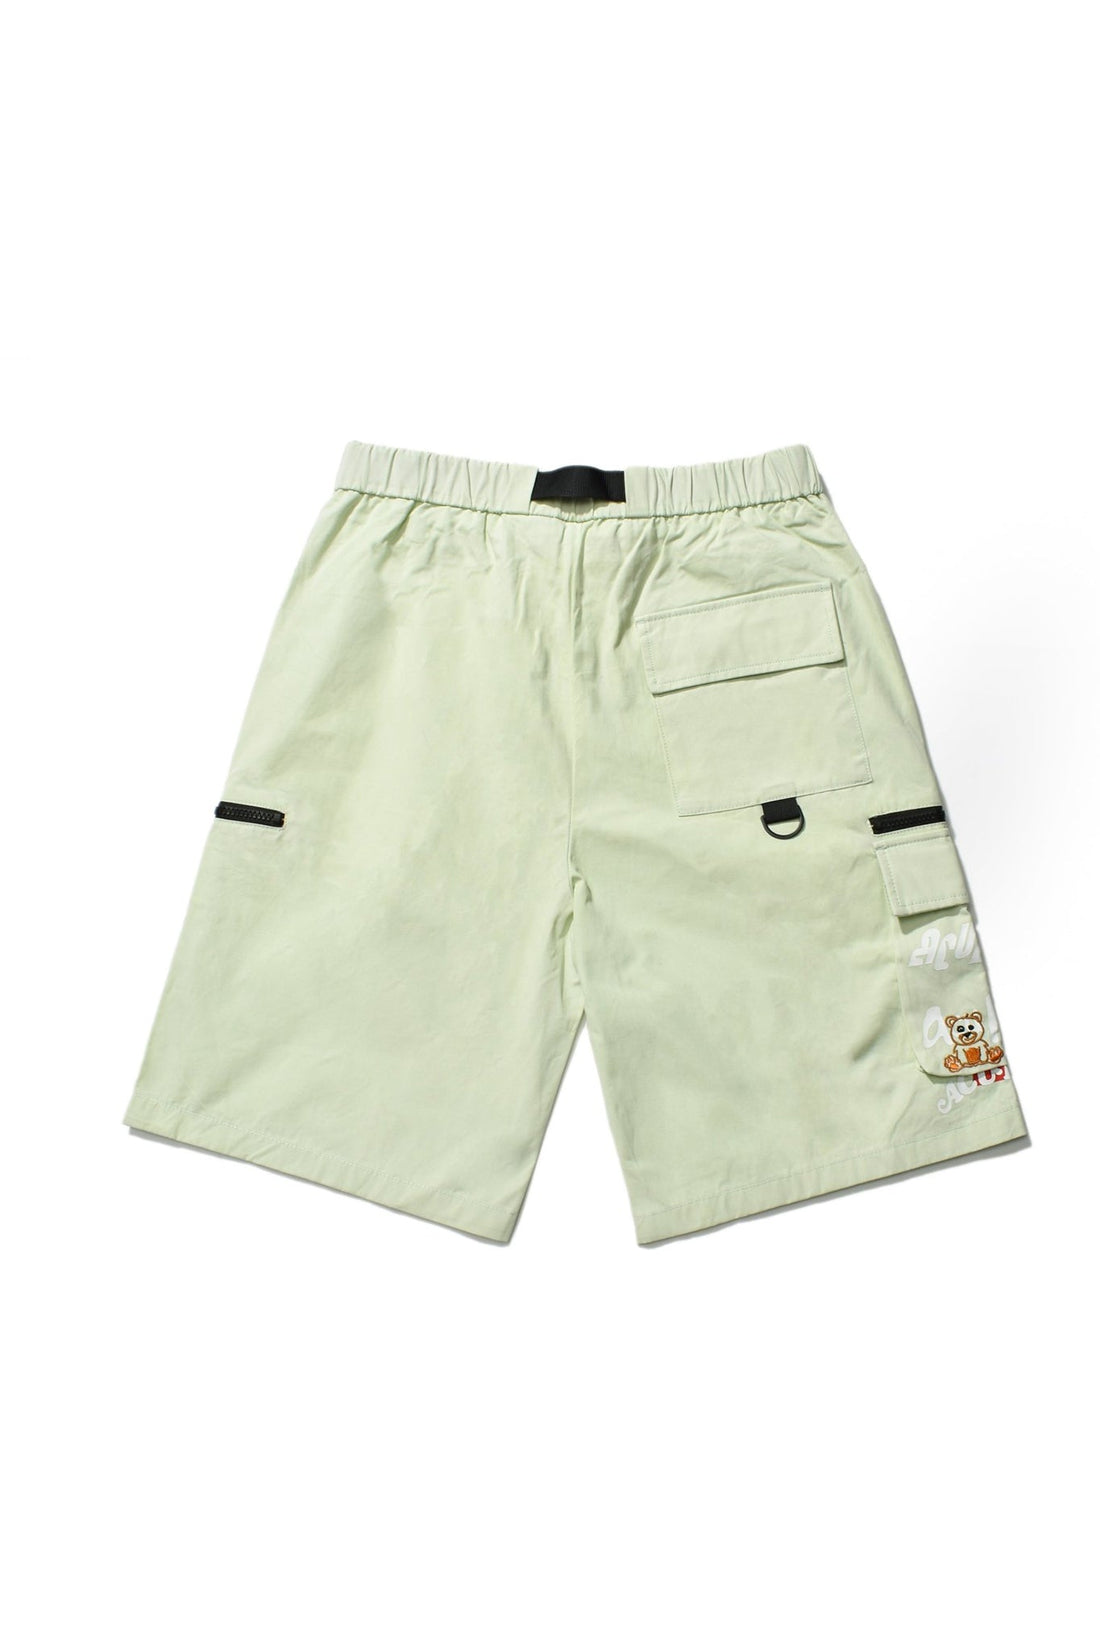 UNION SHORTS GREEN Acupuncture